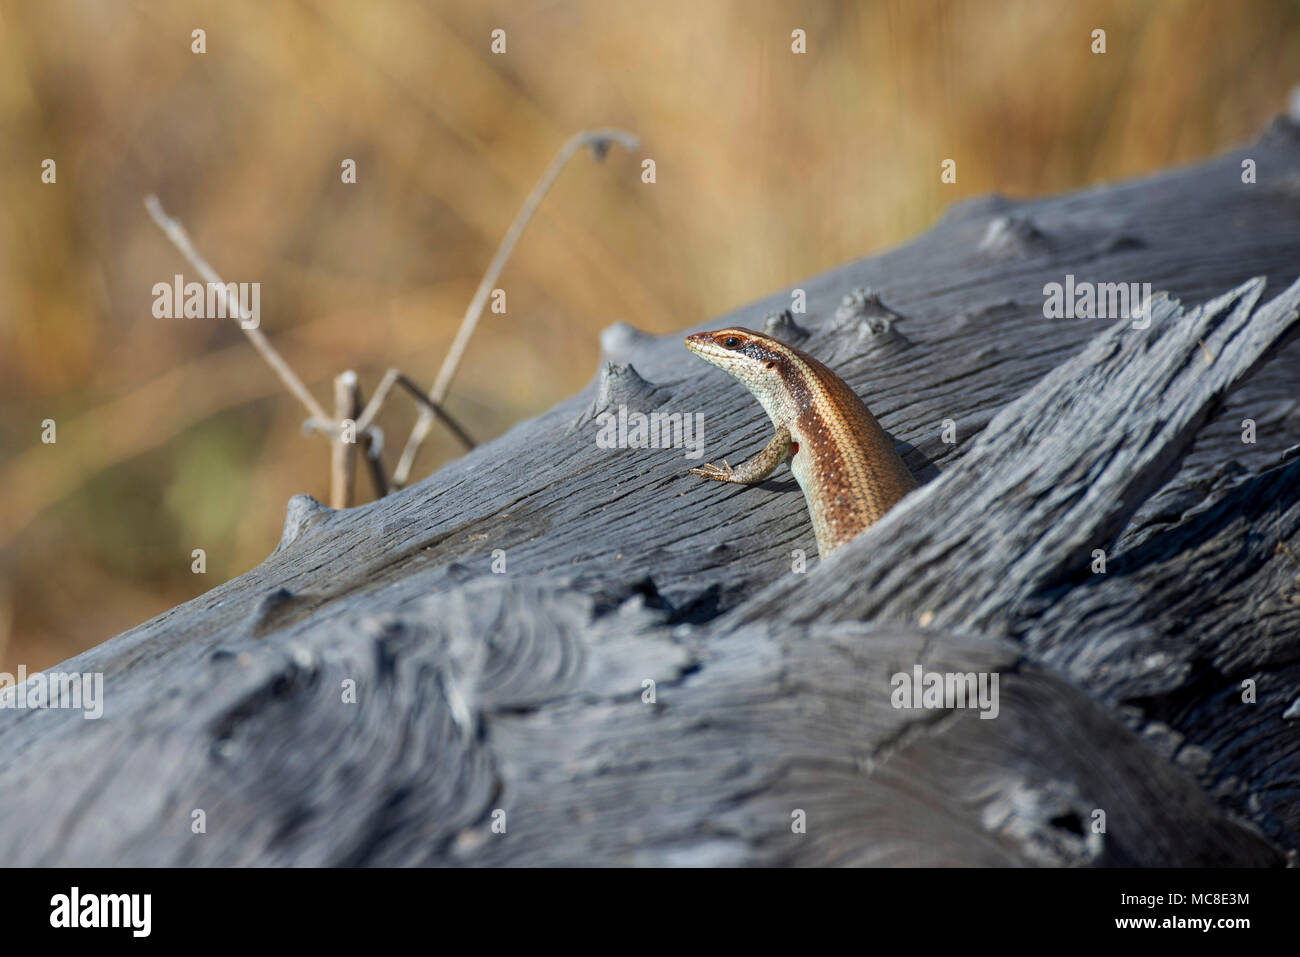 AFRICAN STRIPED SKINK (TRACHYLEPIS STRIATA) RESTING ON LOG, ZAMBIA Stock Photo